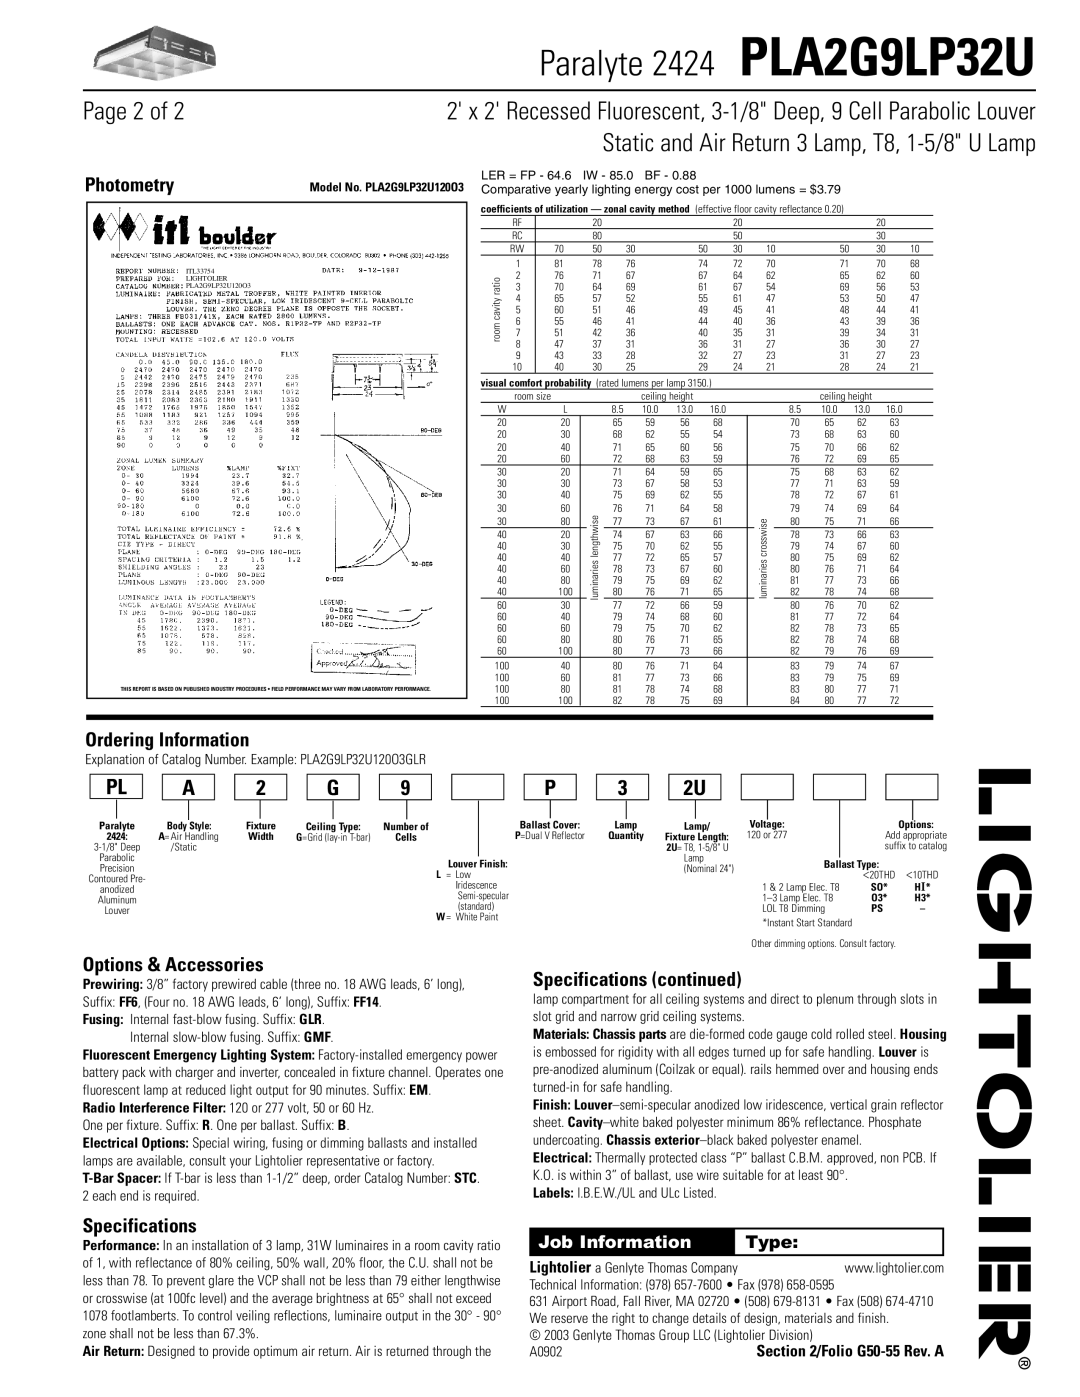 Lightolier PLA2G9LP32U Page 2 of, Photometry, Ordering Information, Options & Accessories, Specifications, Job Information 